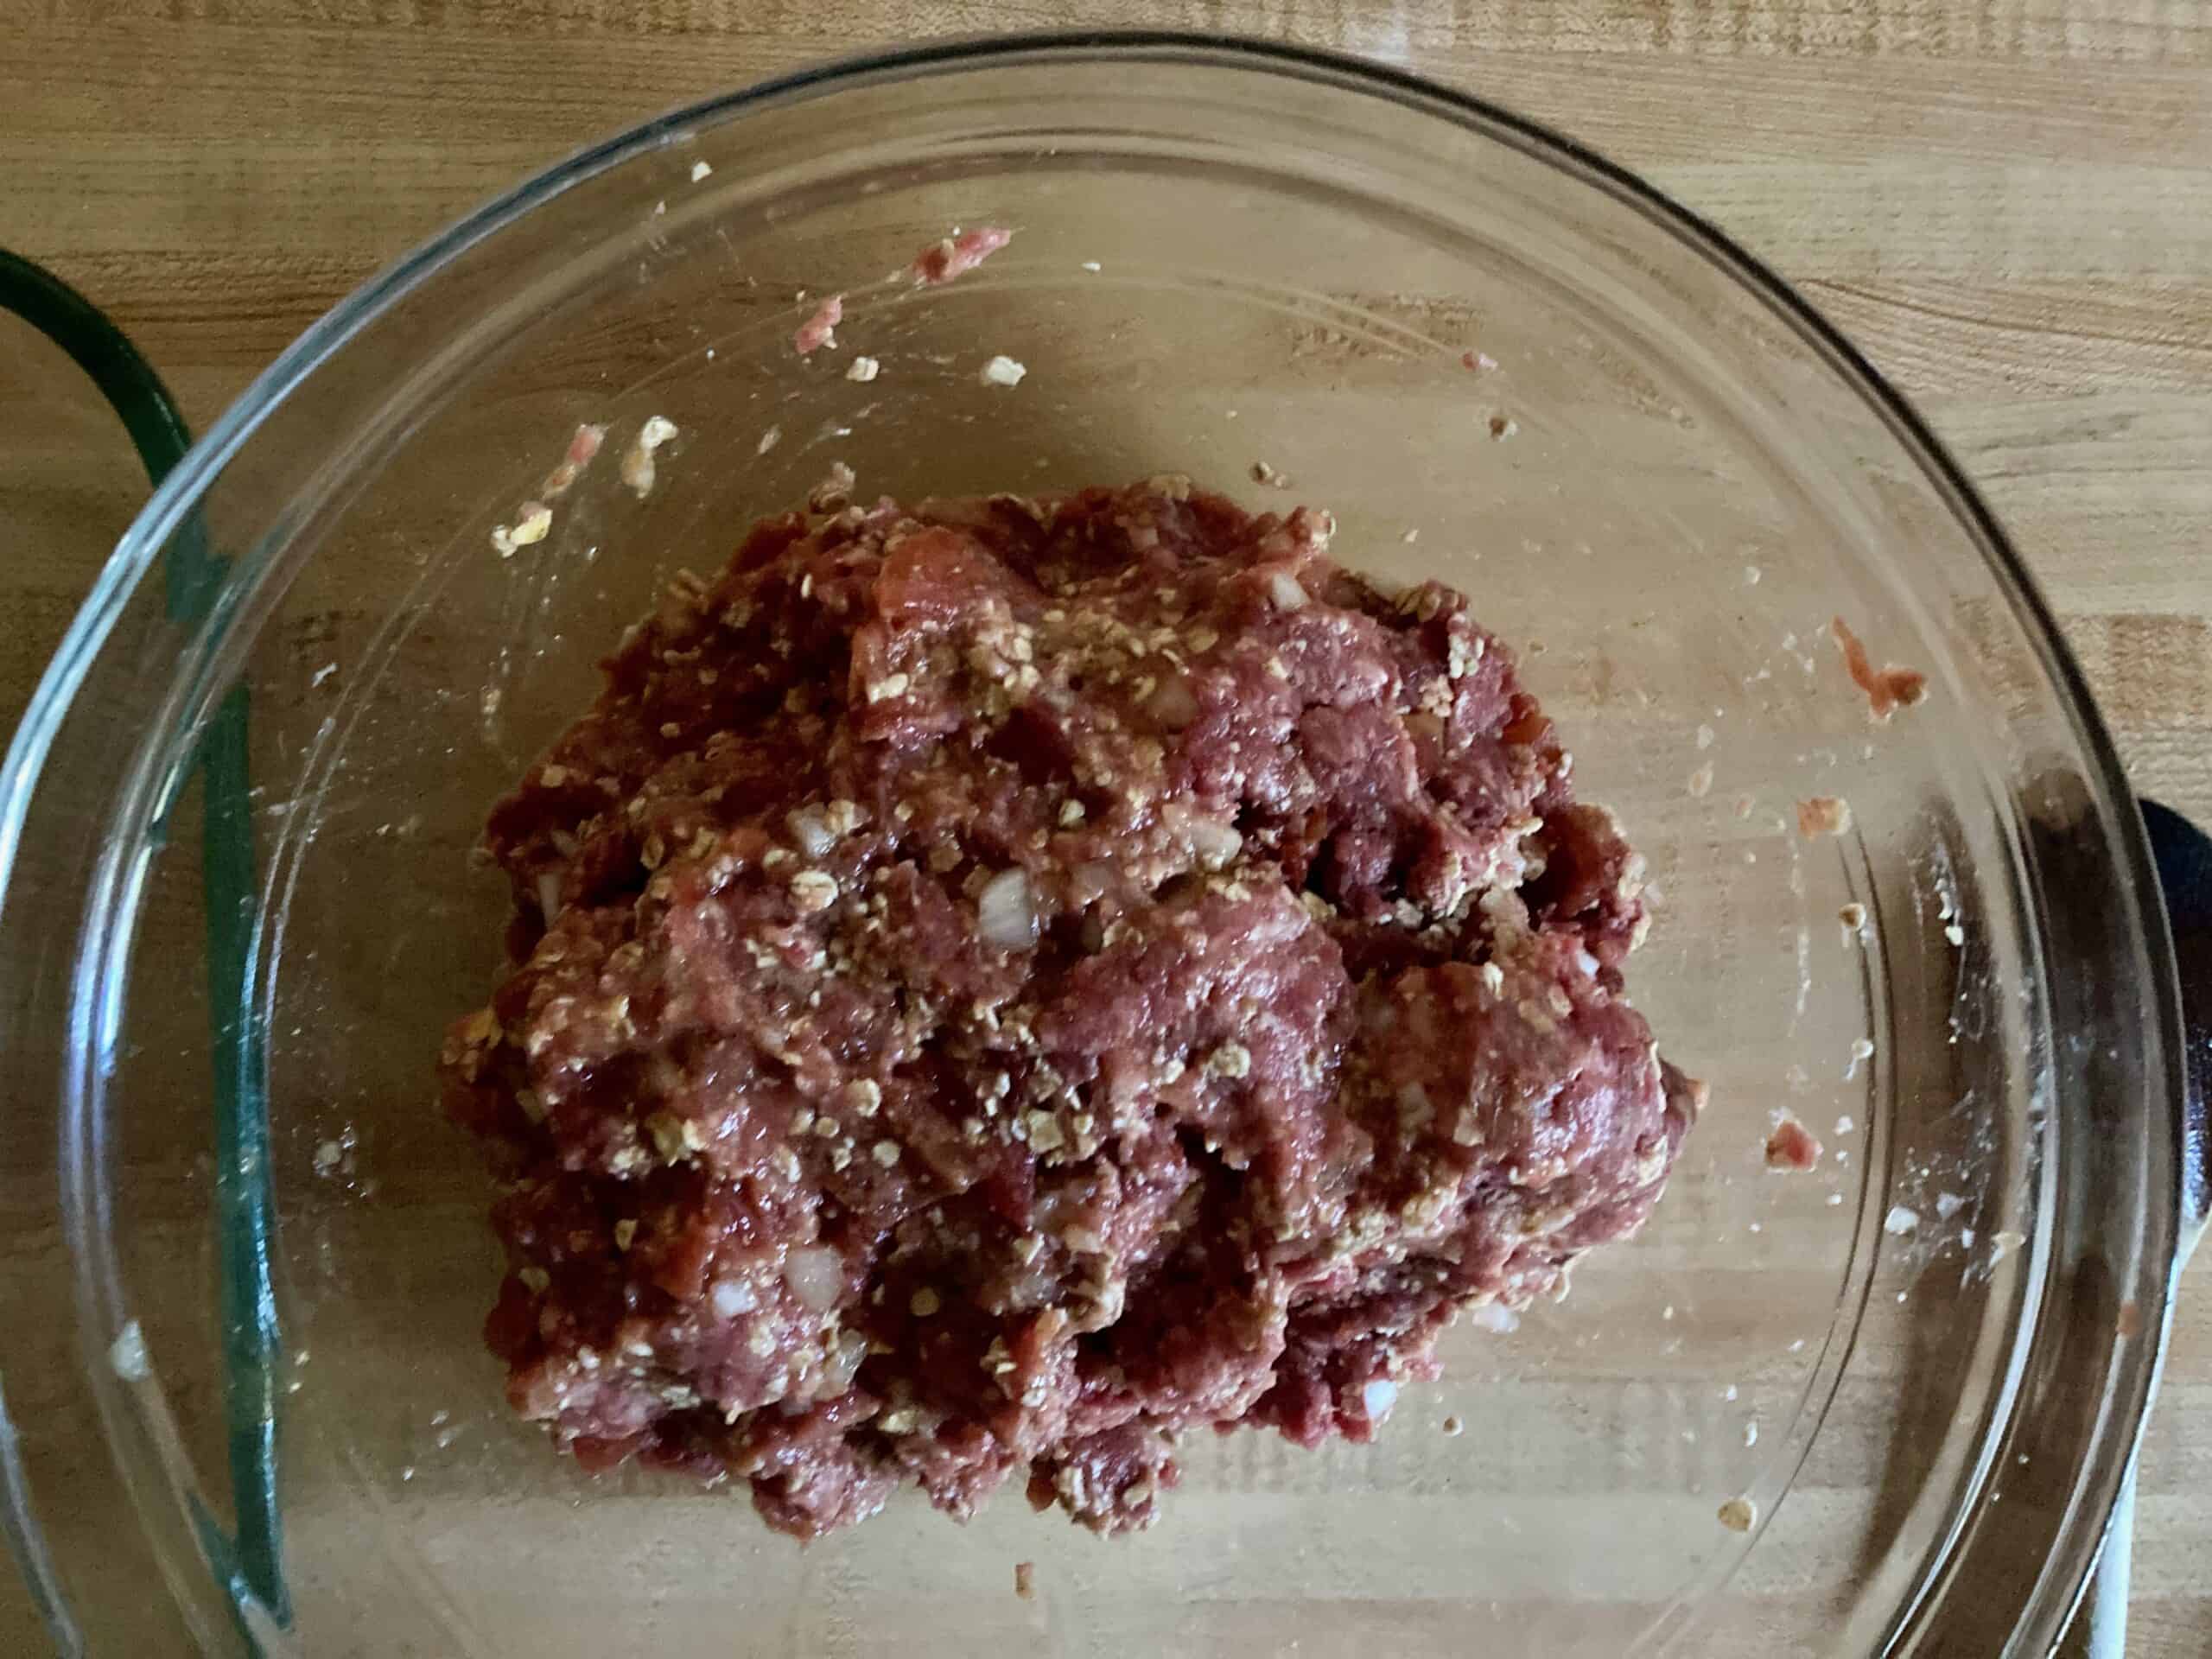 Glass mixing bowl with meatloaf ingredients blended together